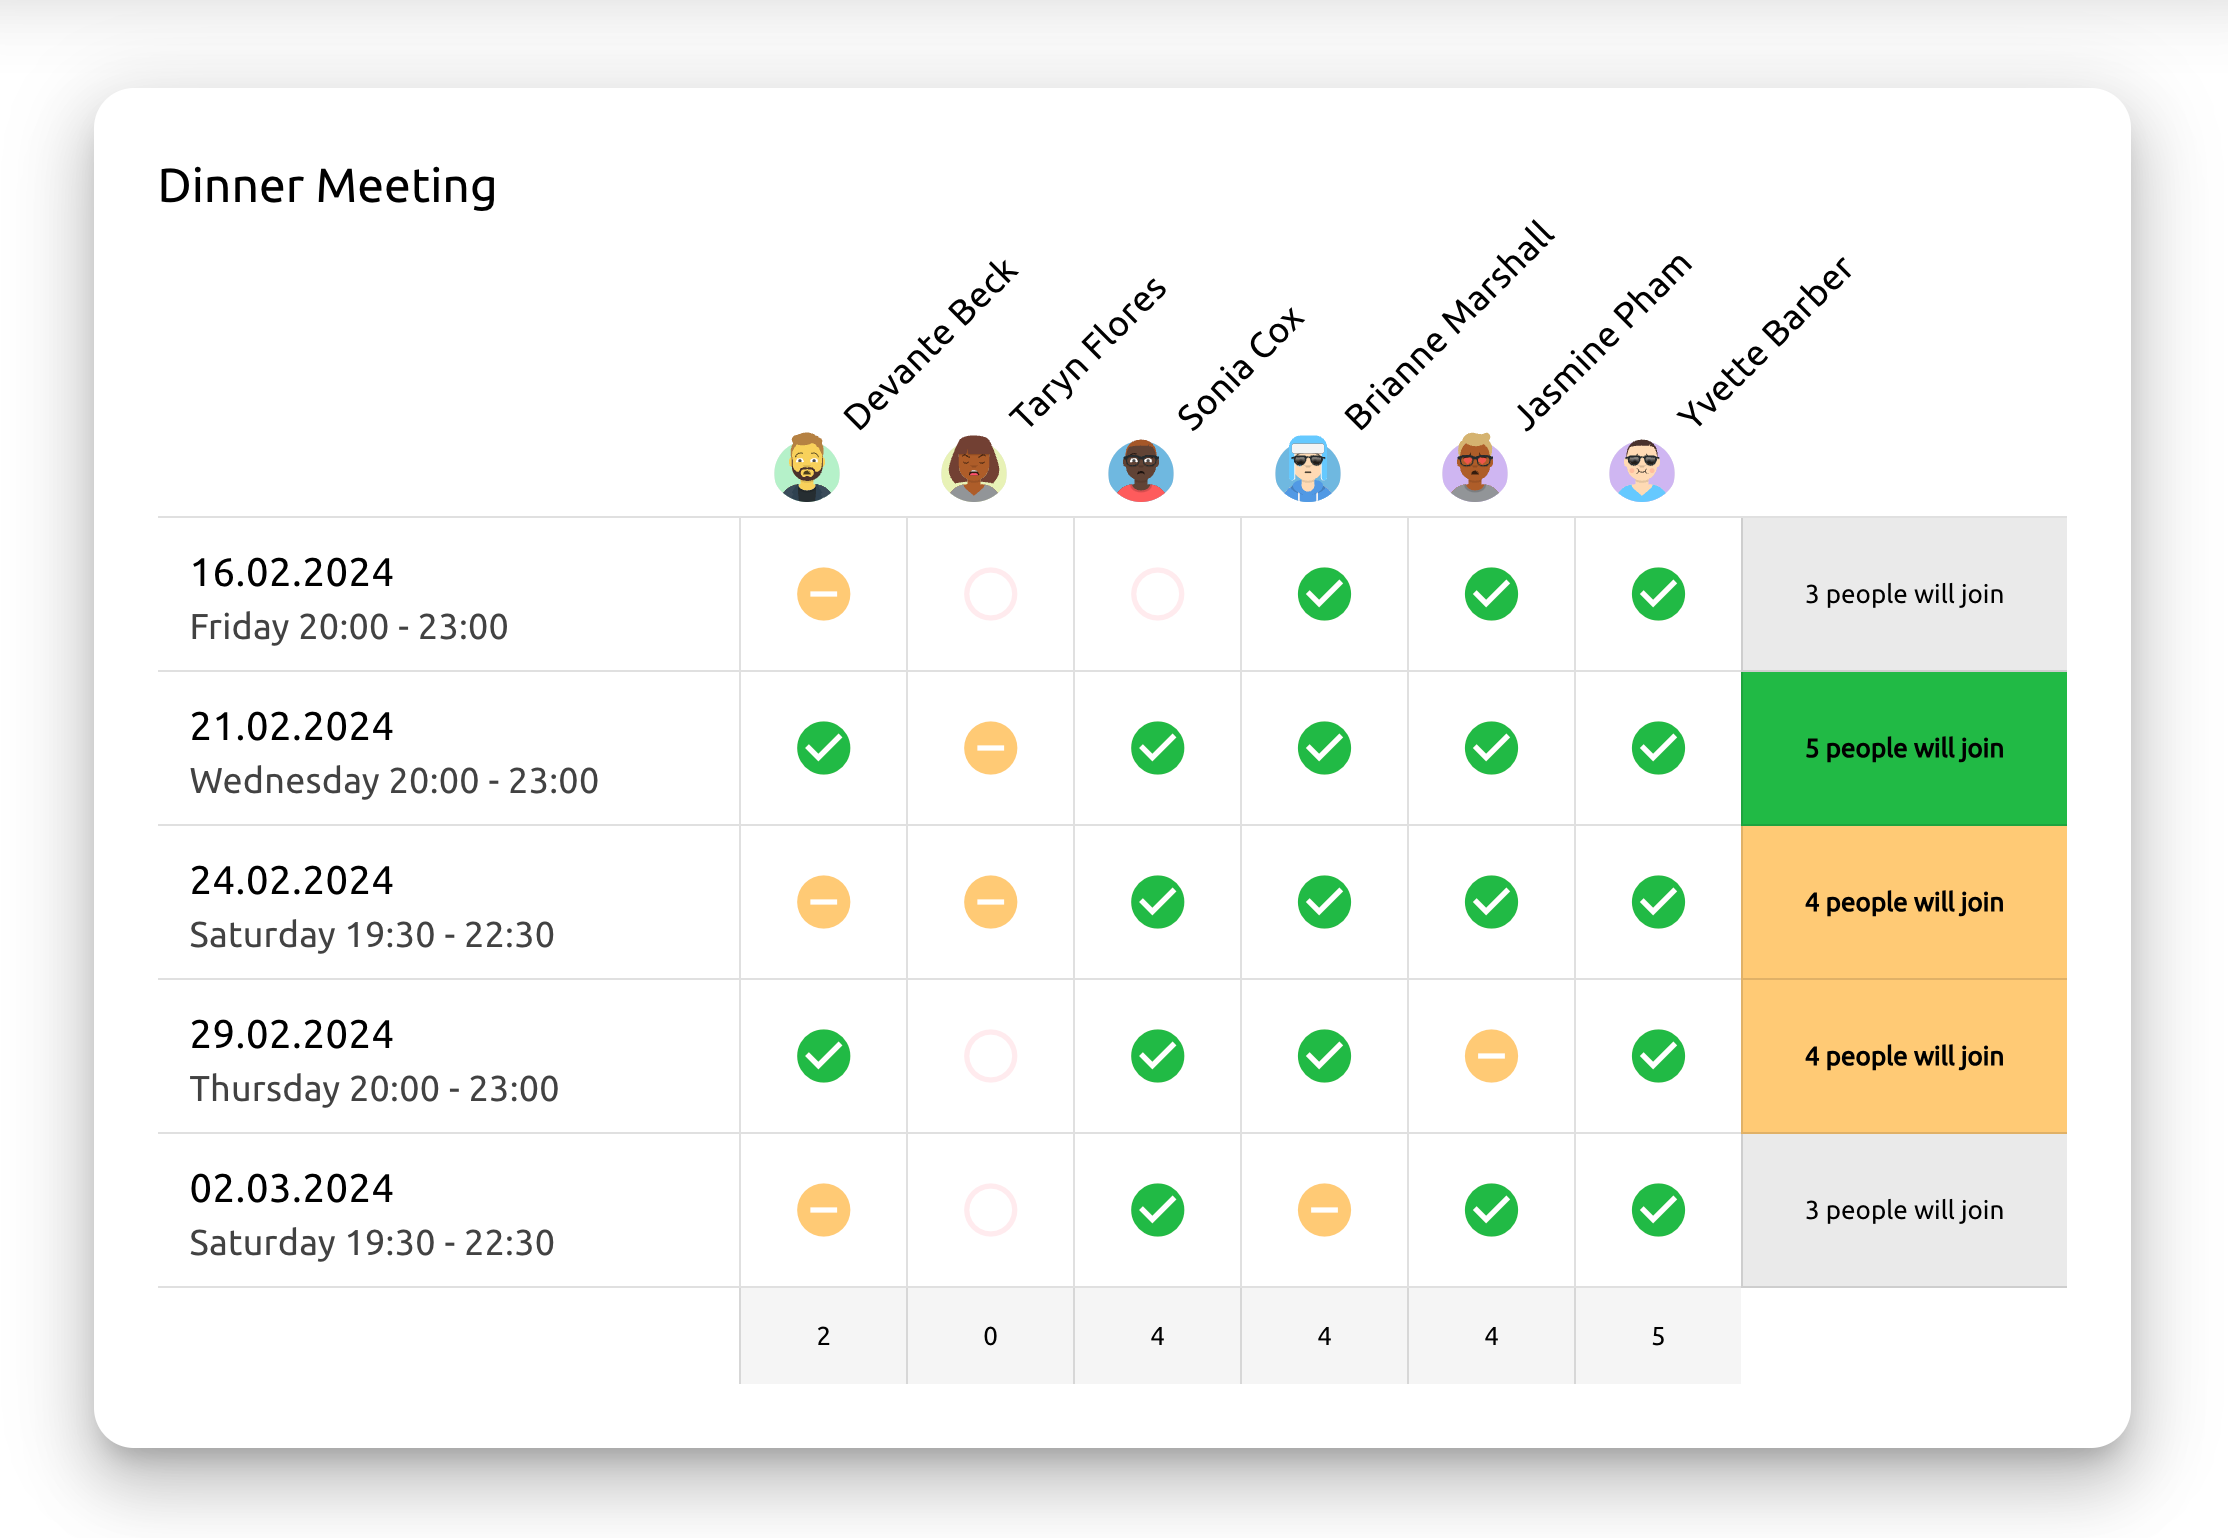 Get an overview and simplify your decision-making and meeting scheduling!